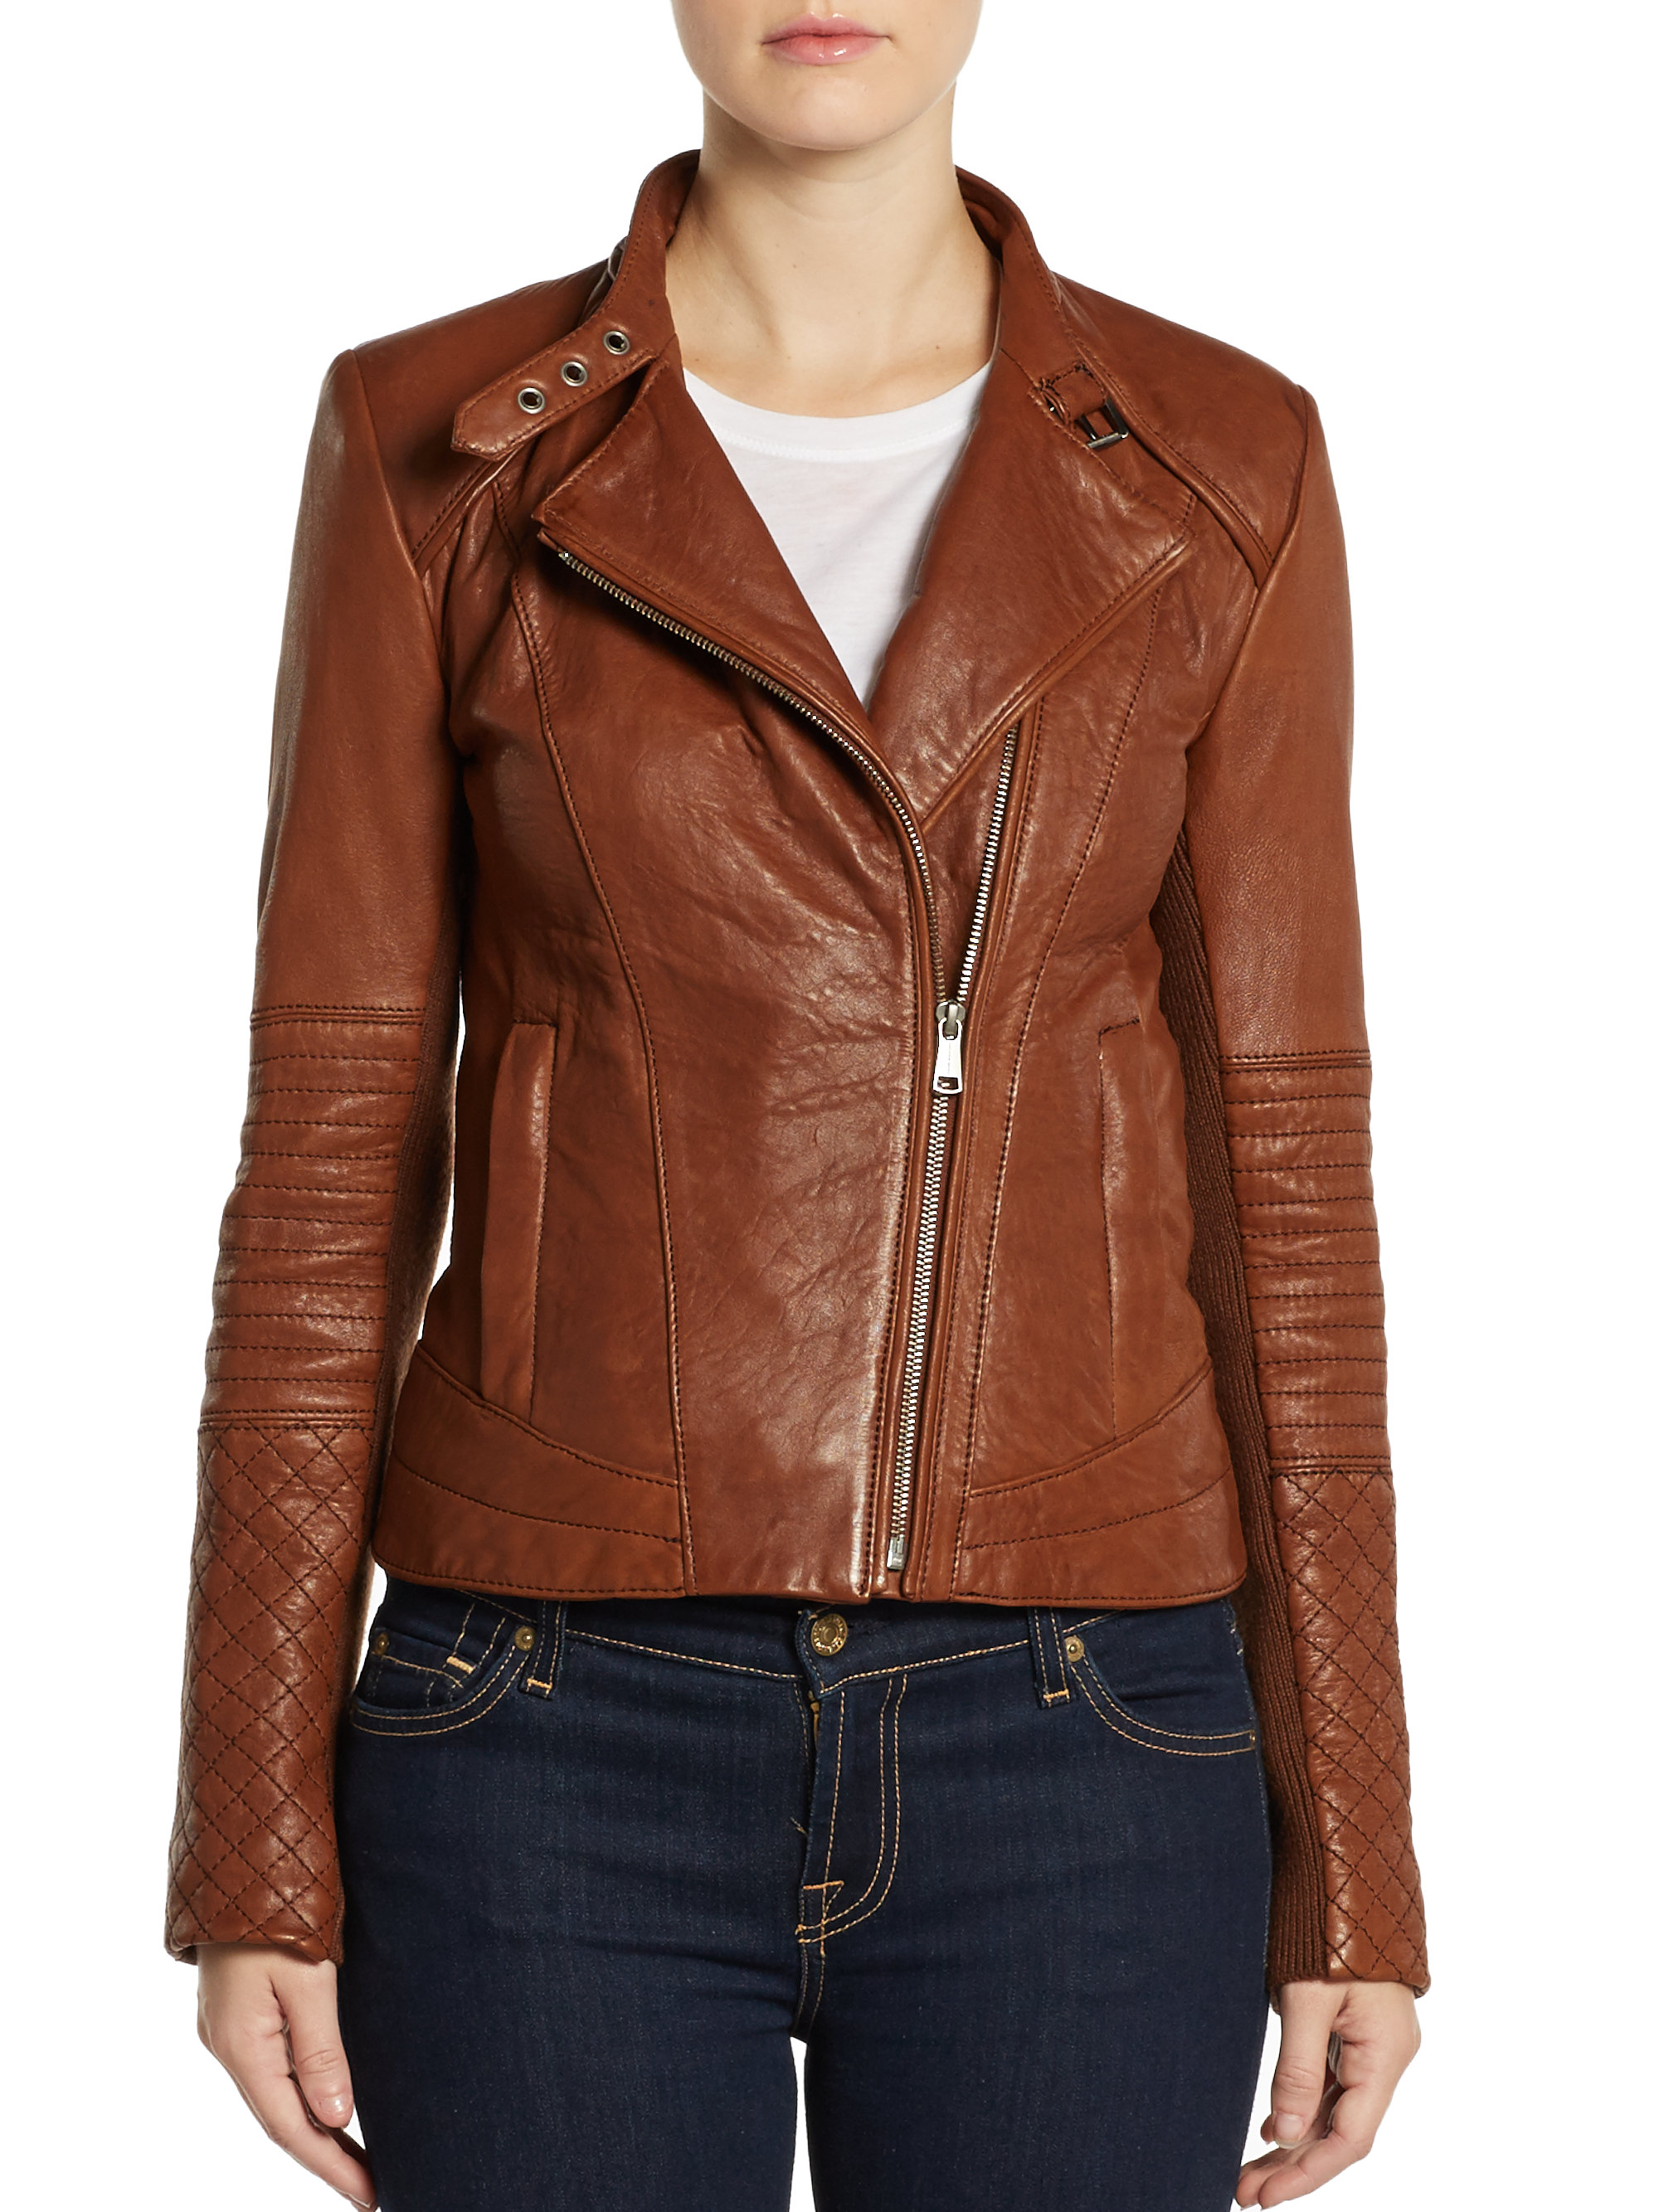 Andrew marc Shay Hooded Leather Jacket in Brown | Lyst